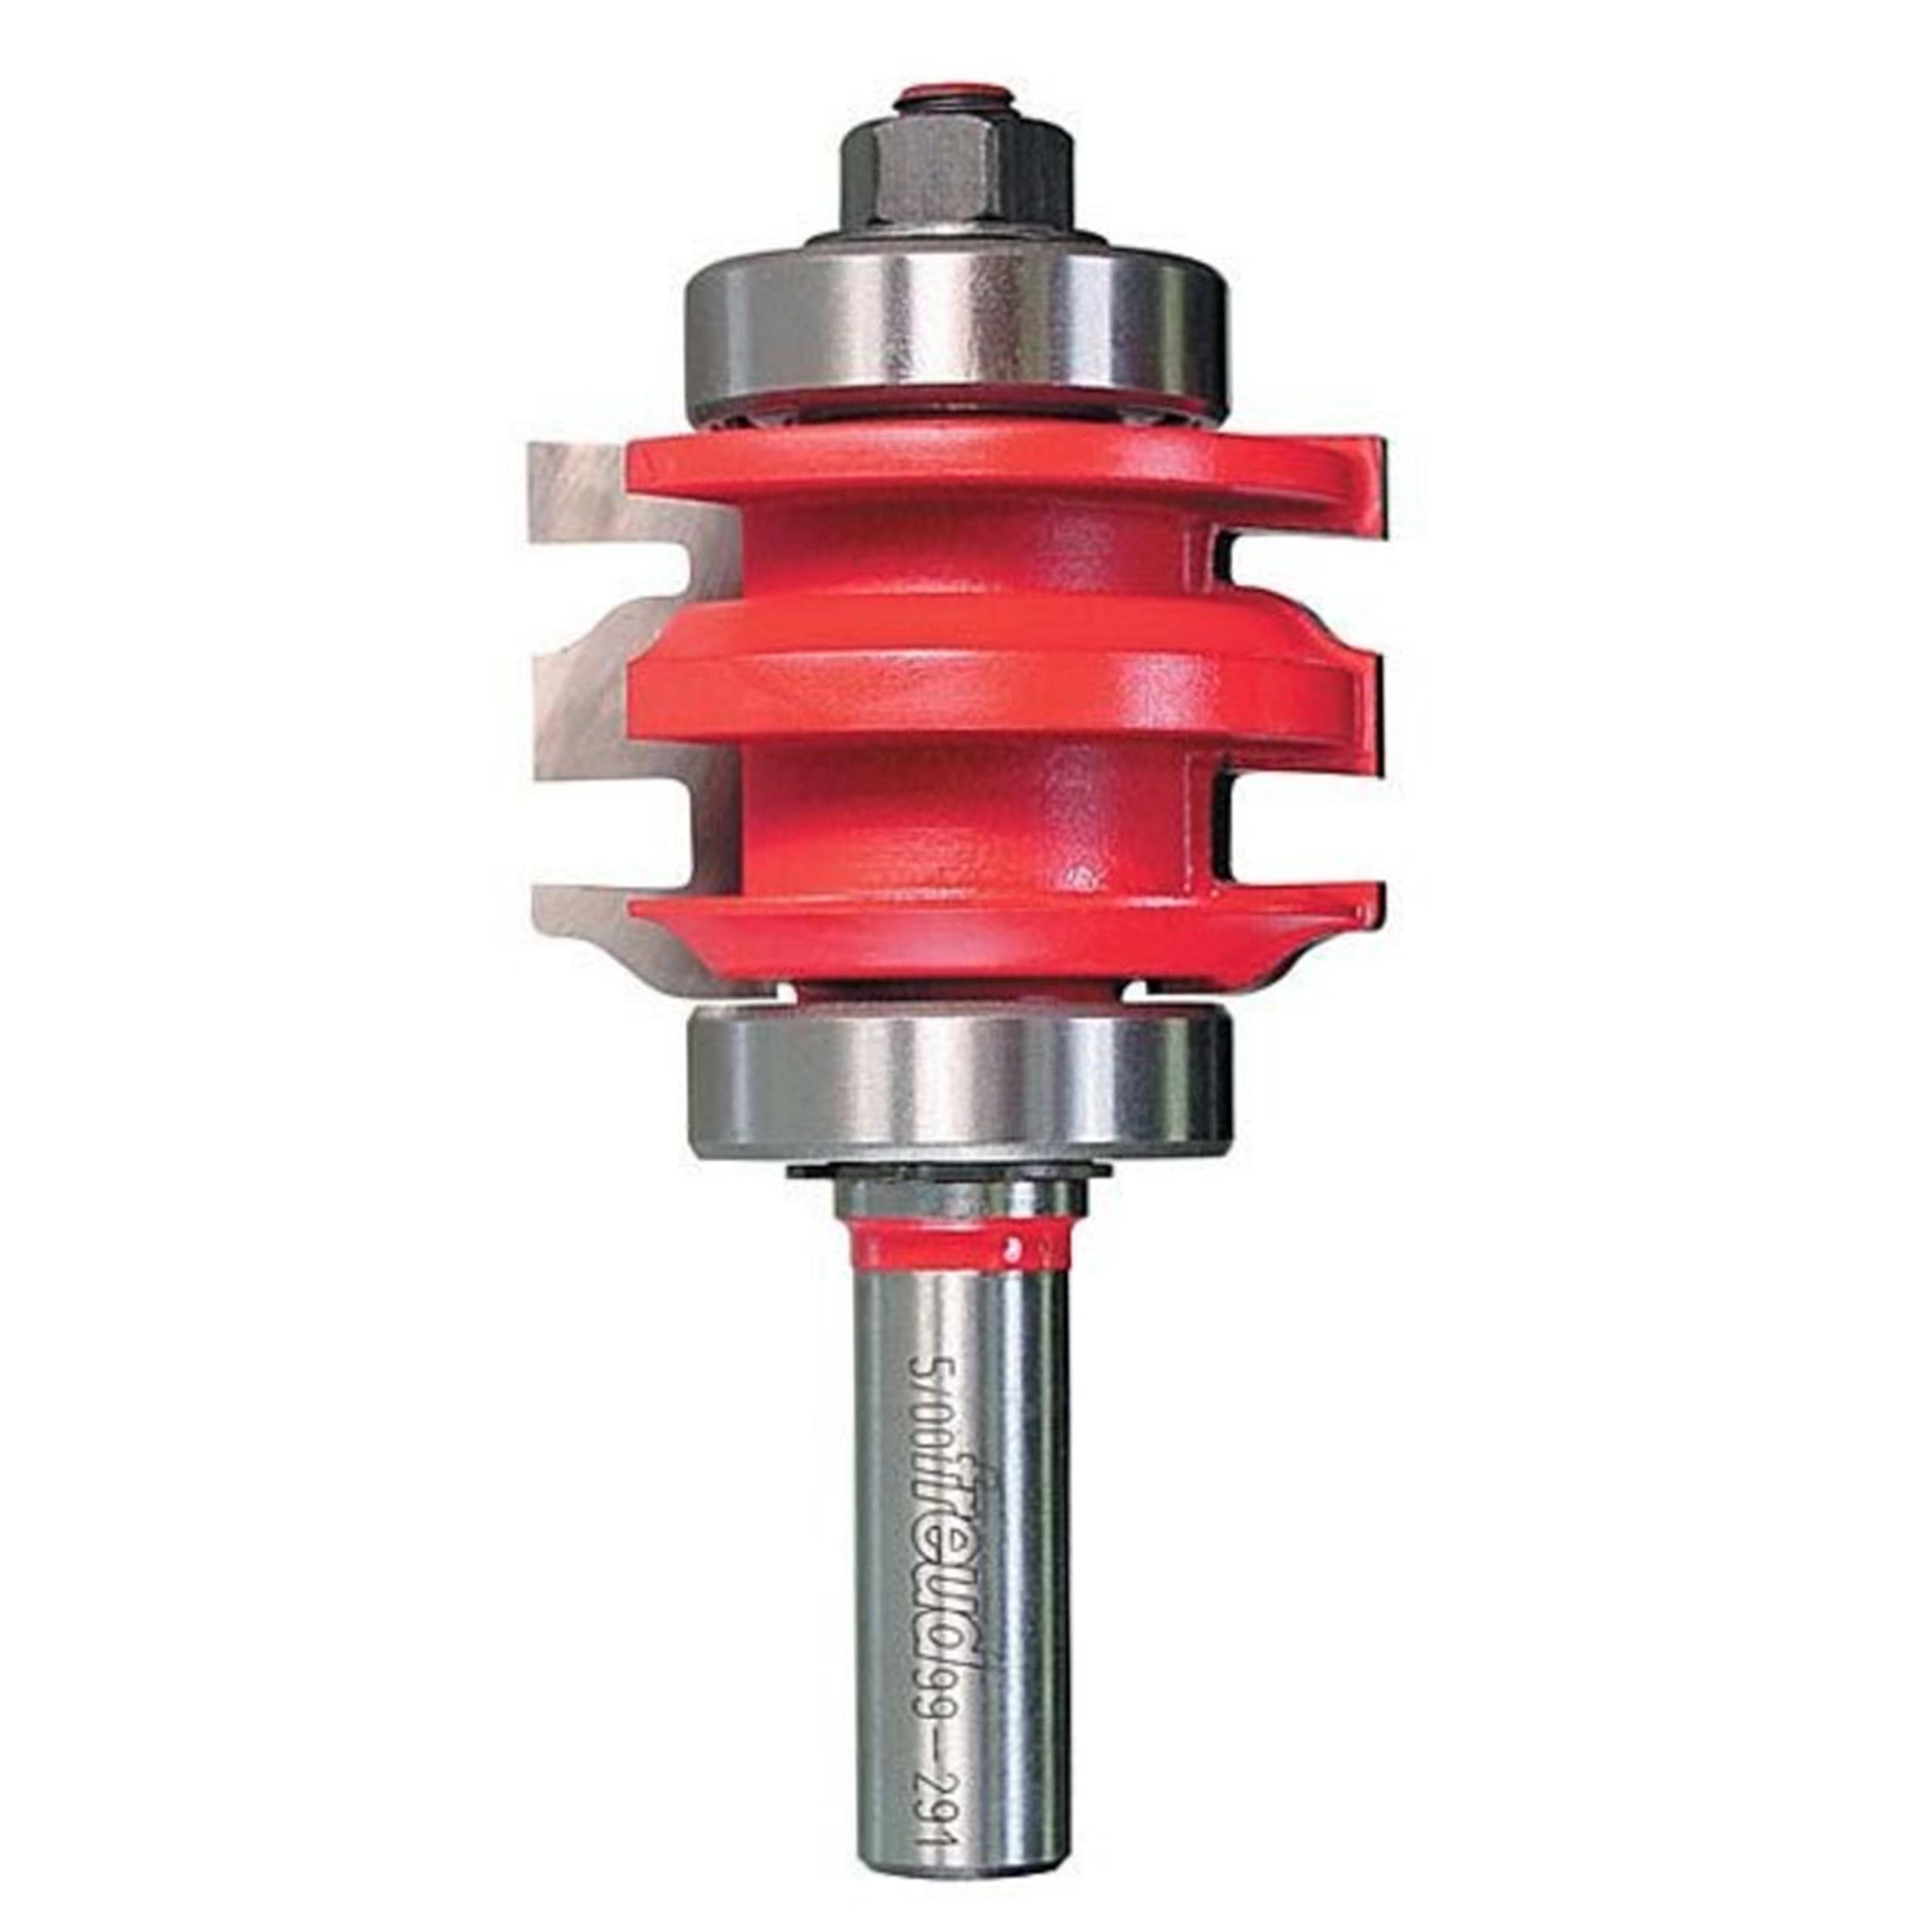 99-291 One Piece Stile And Rail Router Bit Ogee 1/2" Shank